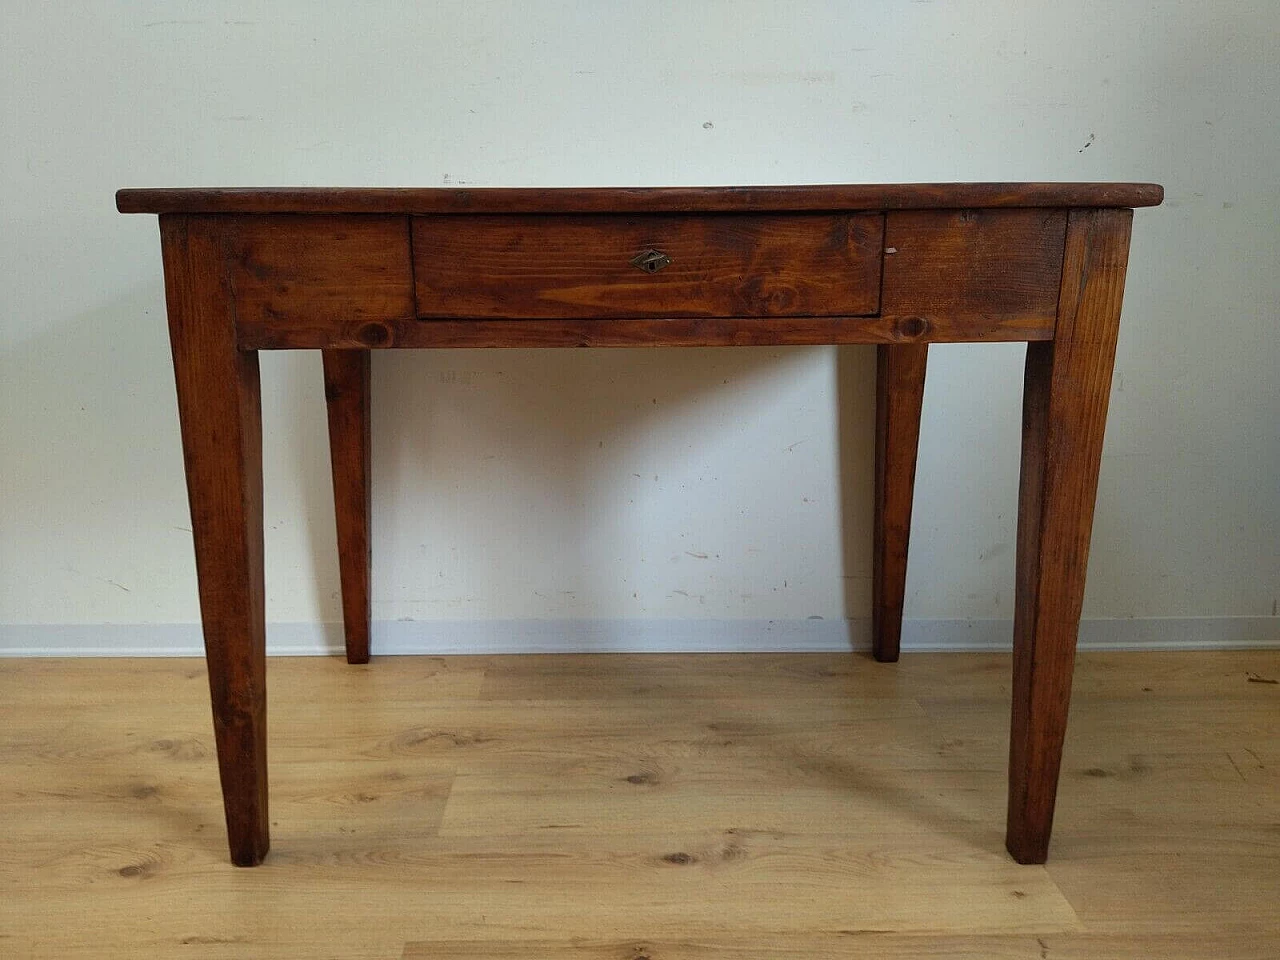 Walnut-stained solid spruce desk, late 19th century 16